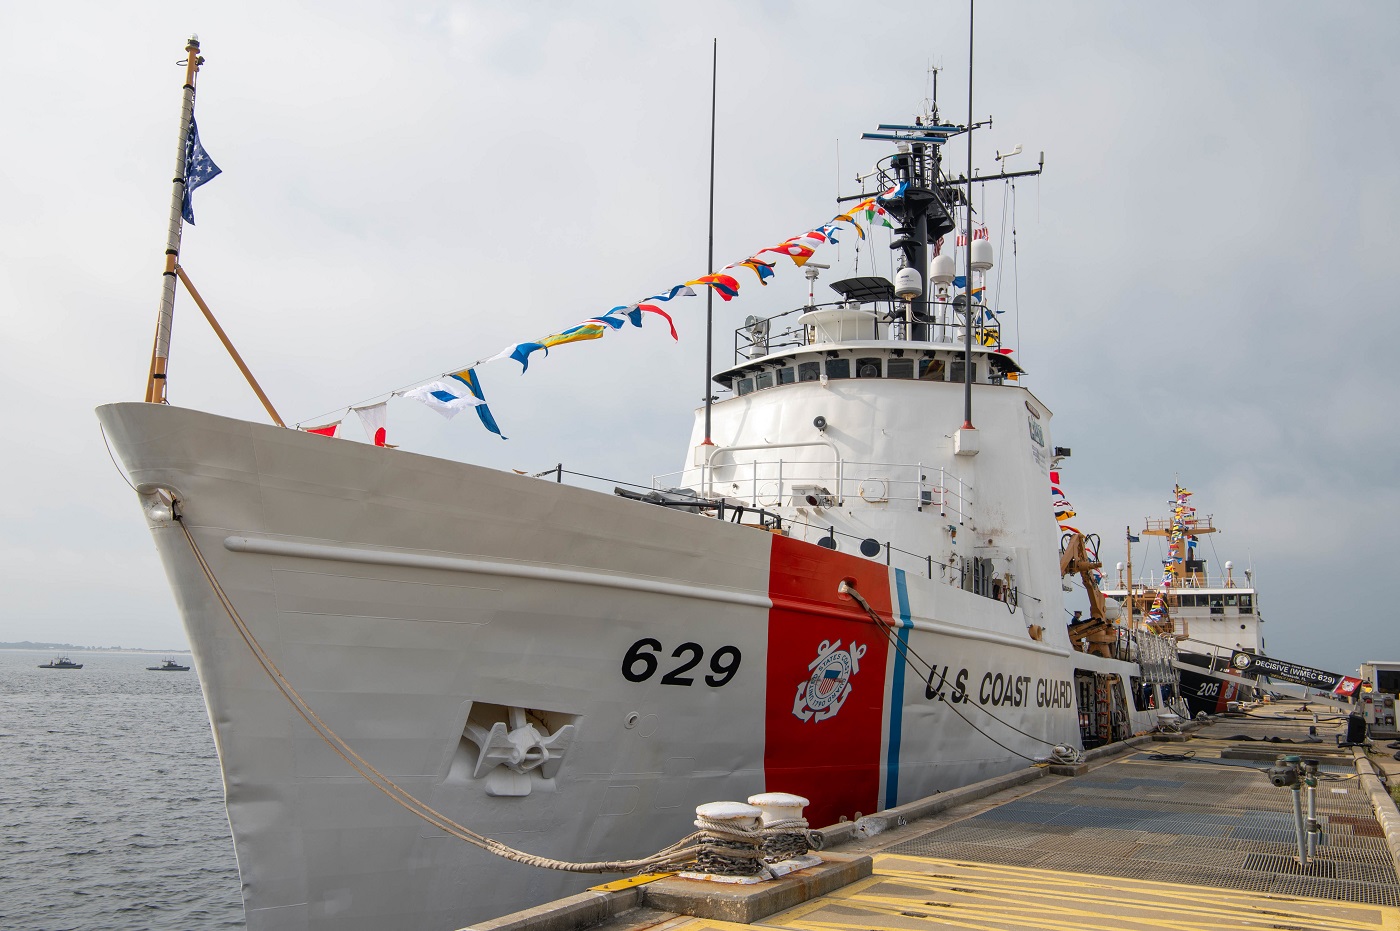 The Coast Guard Cutter Decisive moored for its decommissioning ceremony at Pensacola, Florida, March 2, 2023. During the ceremony, the Coast Guard retired Decisive after its 55 years of dedicated service. (U.S. Coast Guard photo by Petty Officer 2nd Class Jose Hernandez)